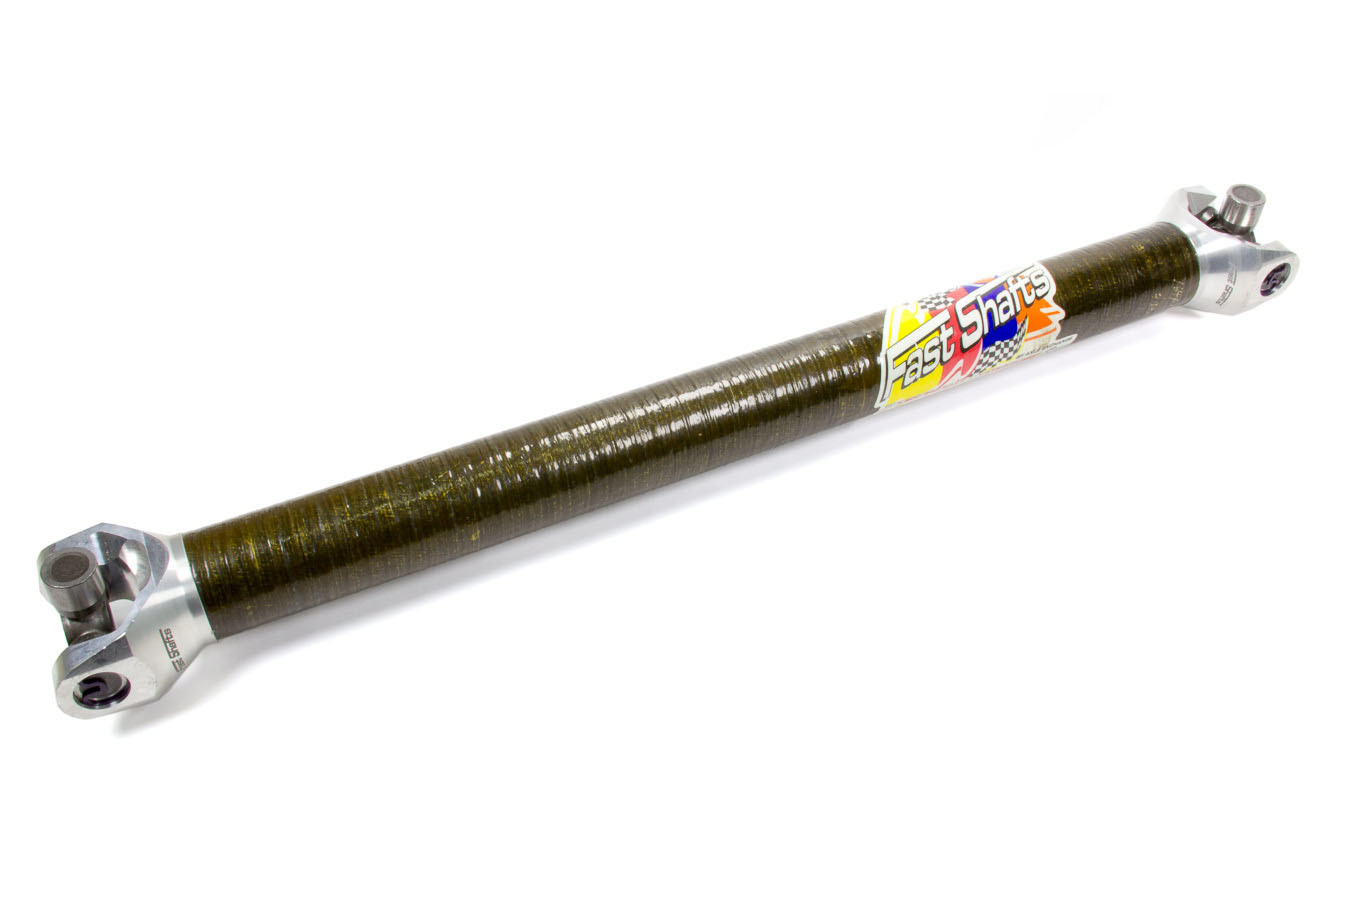 Fast Shafts 2CF-10X1035 Drive Shaft, 35 in Long, 2-1/4 in OD, 1310 U-Joints, Carbon Fiber, Universal, Each